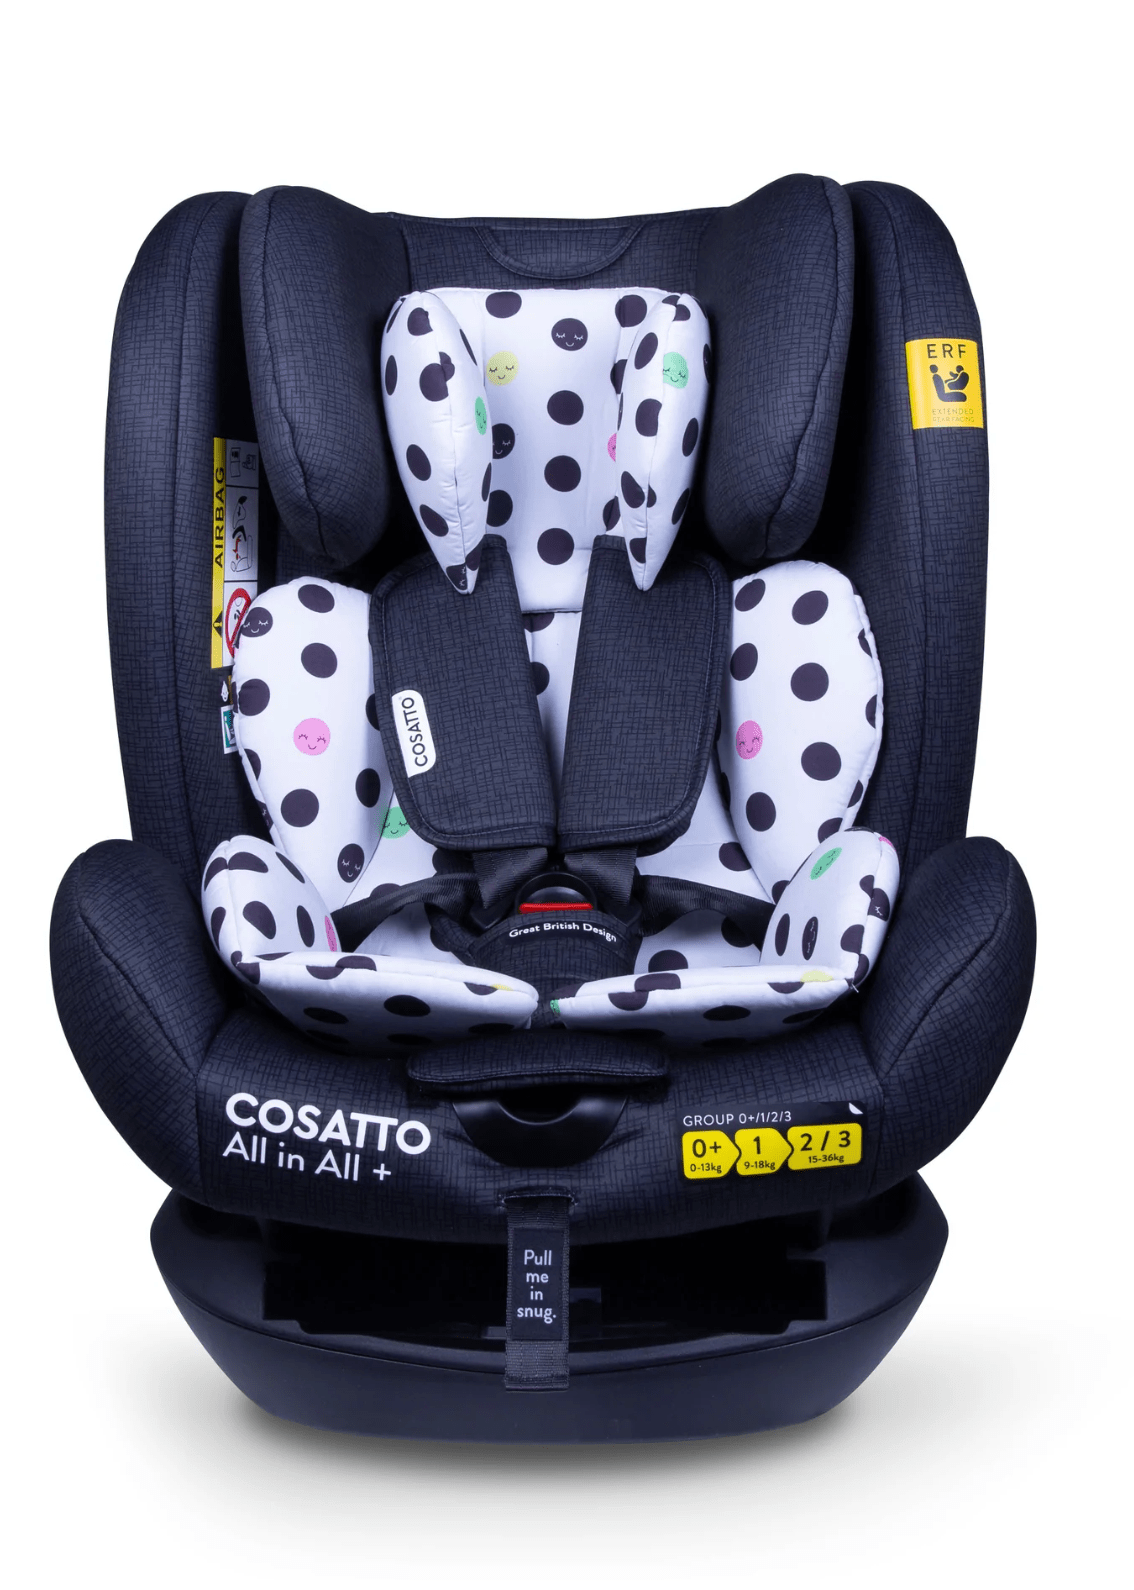 Cosatto Car Seats & Bases Happy Smile Cosatto All In All + Group 0+123 Car Seat - Direct Delivery